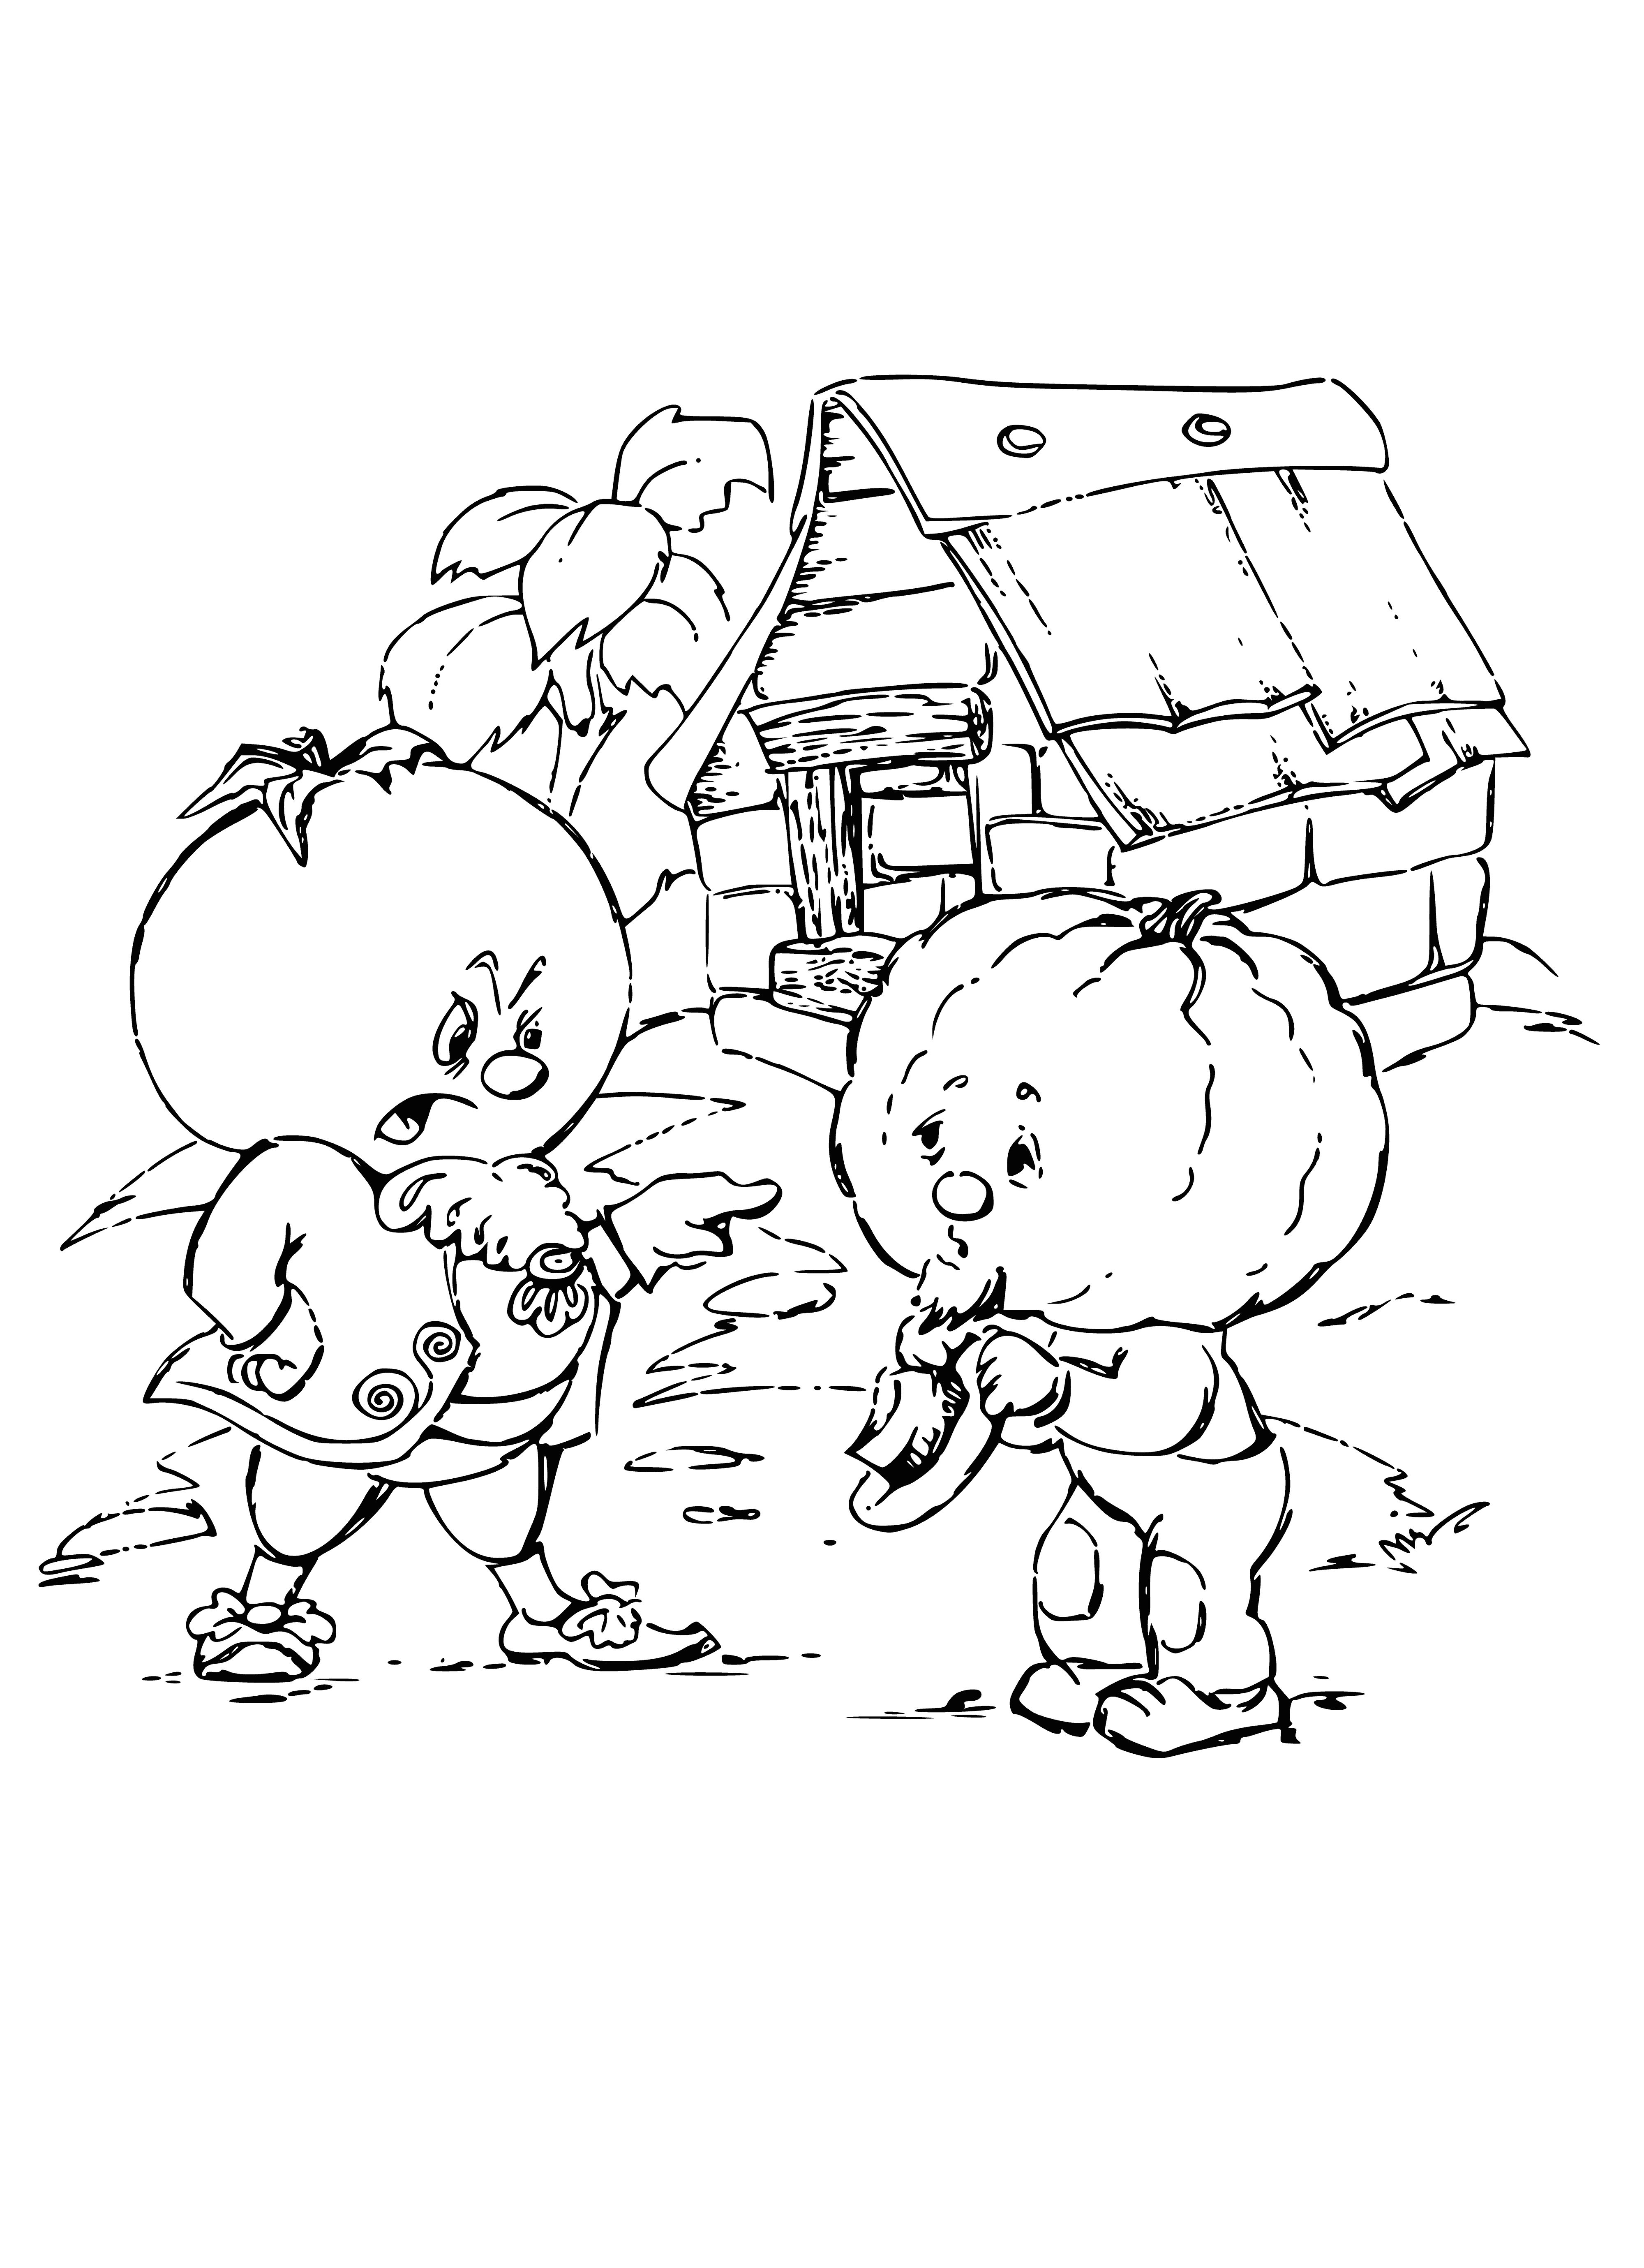 coloring page: Signor Tomato and Godfather Pumpkin converse; Signor Tomato brags about his brave and adventurous son, Cipollino, who Godfather Pumpkin wishes to meet.